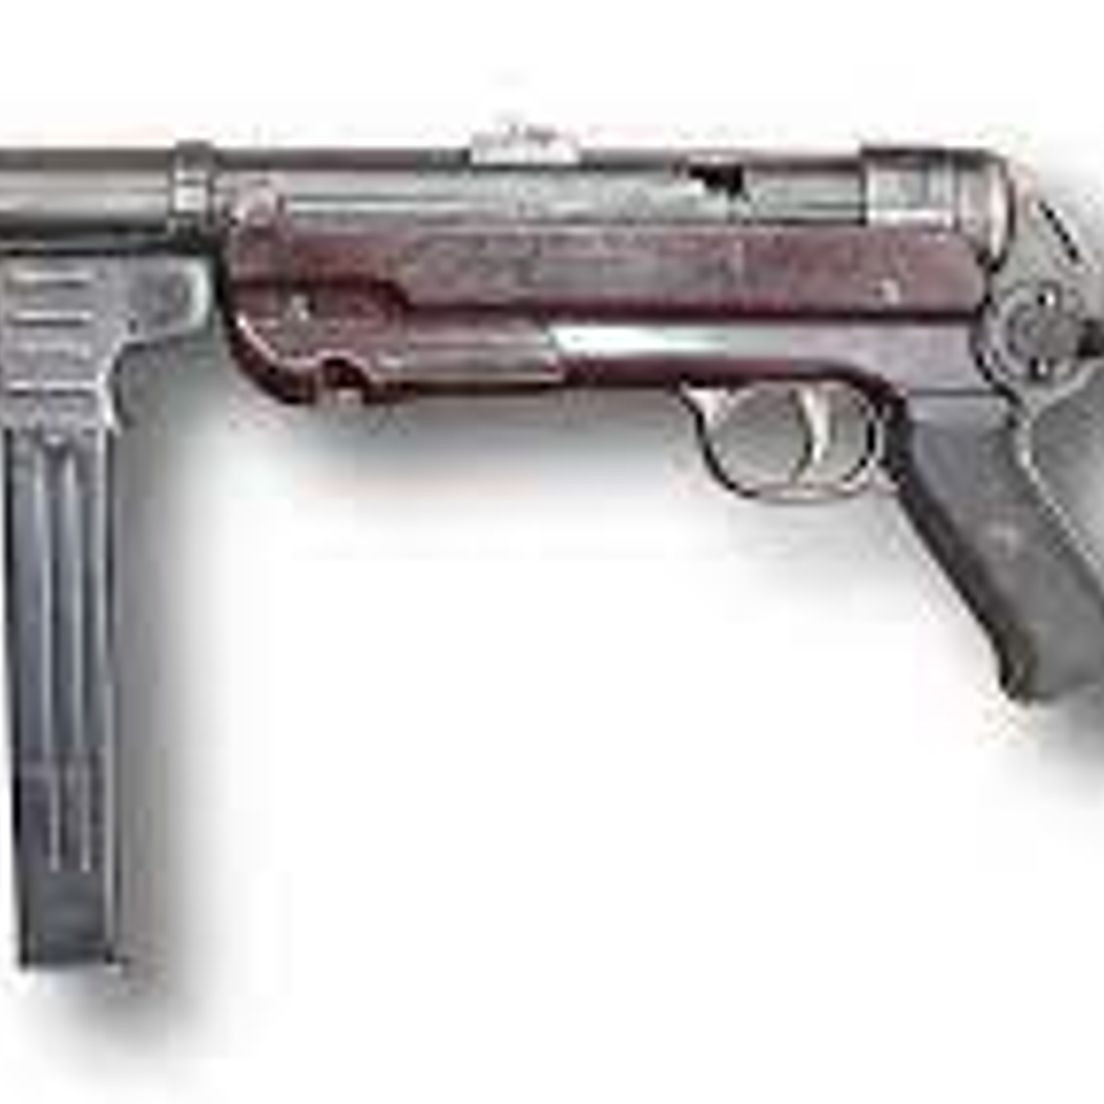 The MP40 - The wonder weapon of the Germans in World War 2